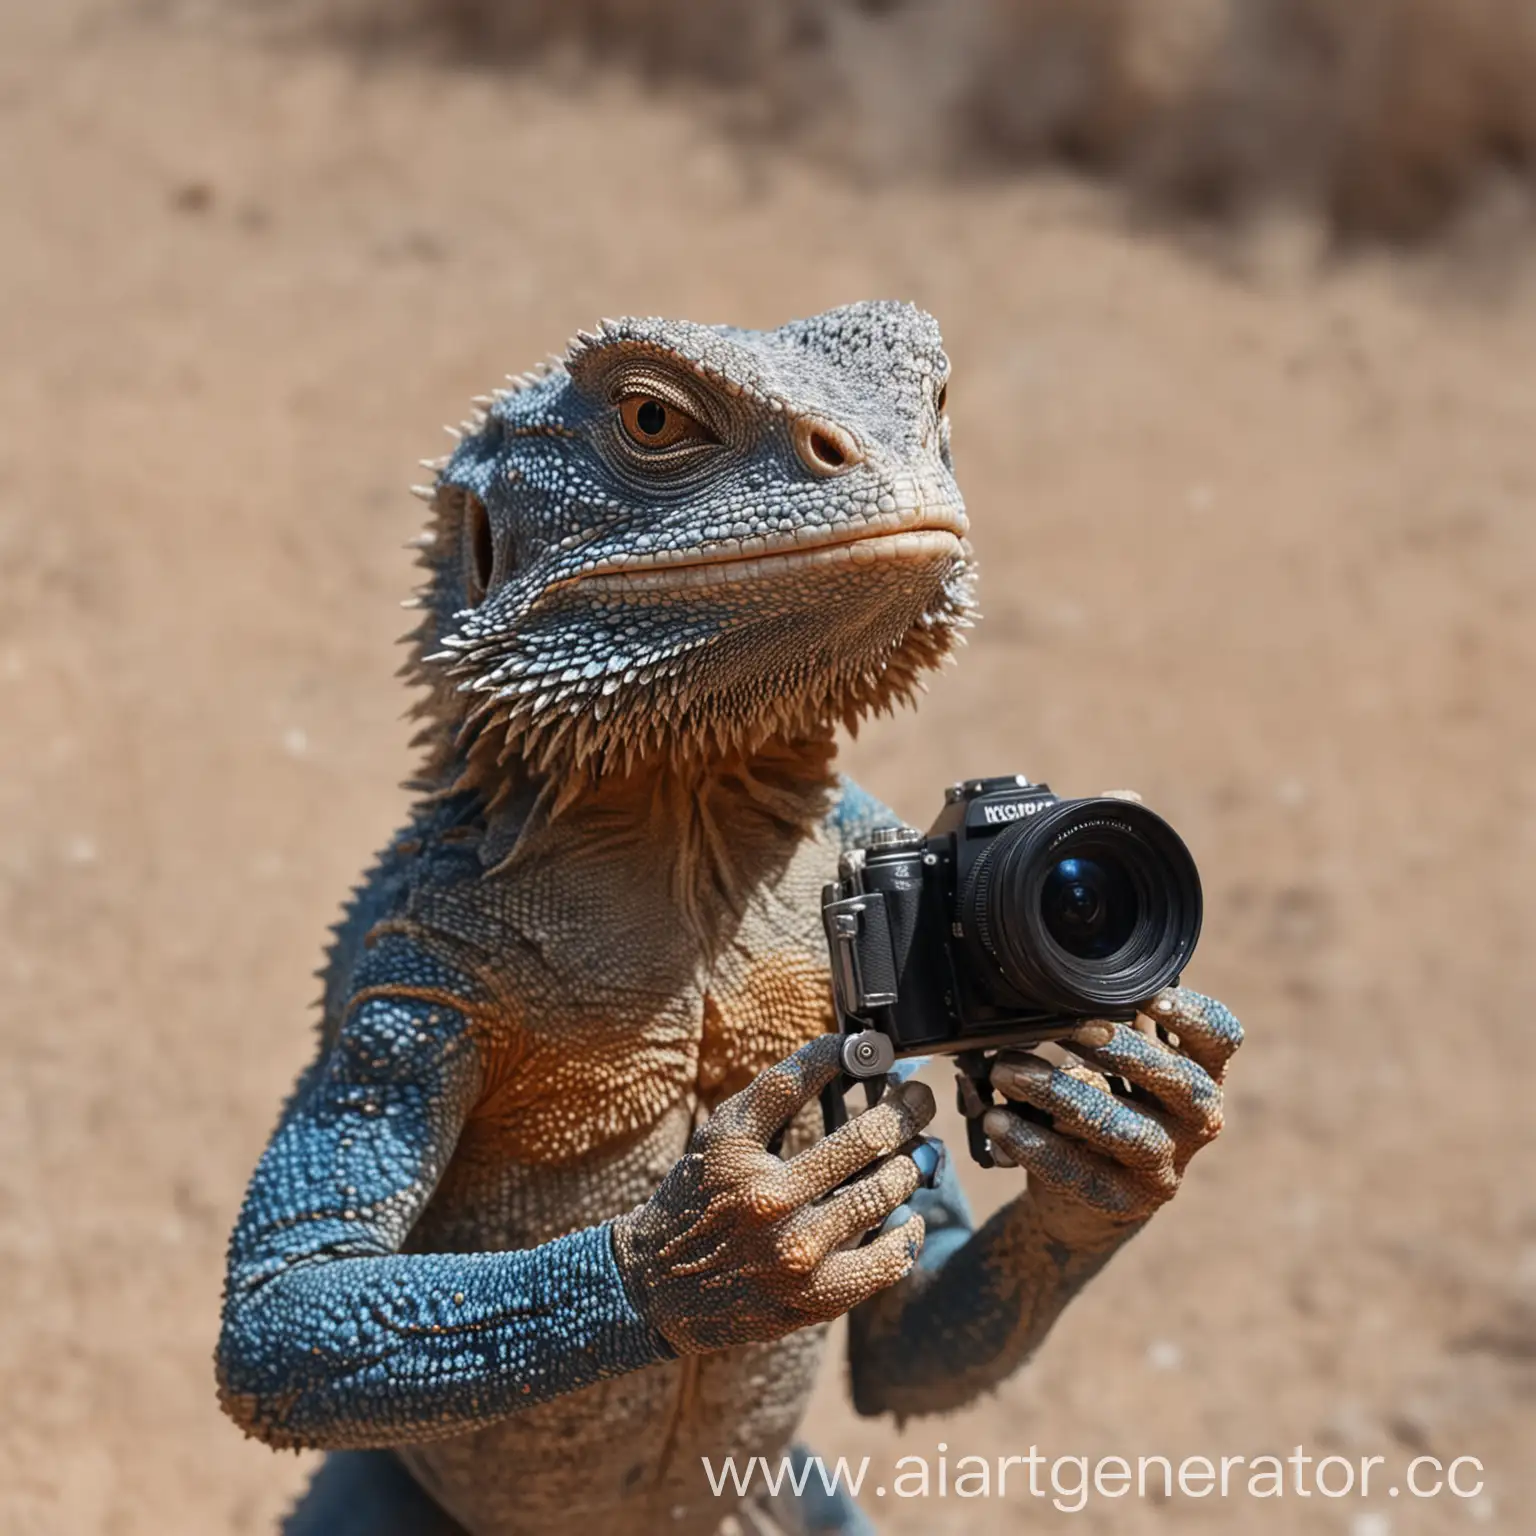 Bearded-Agama-Filming-with-Camera